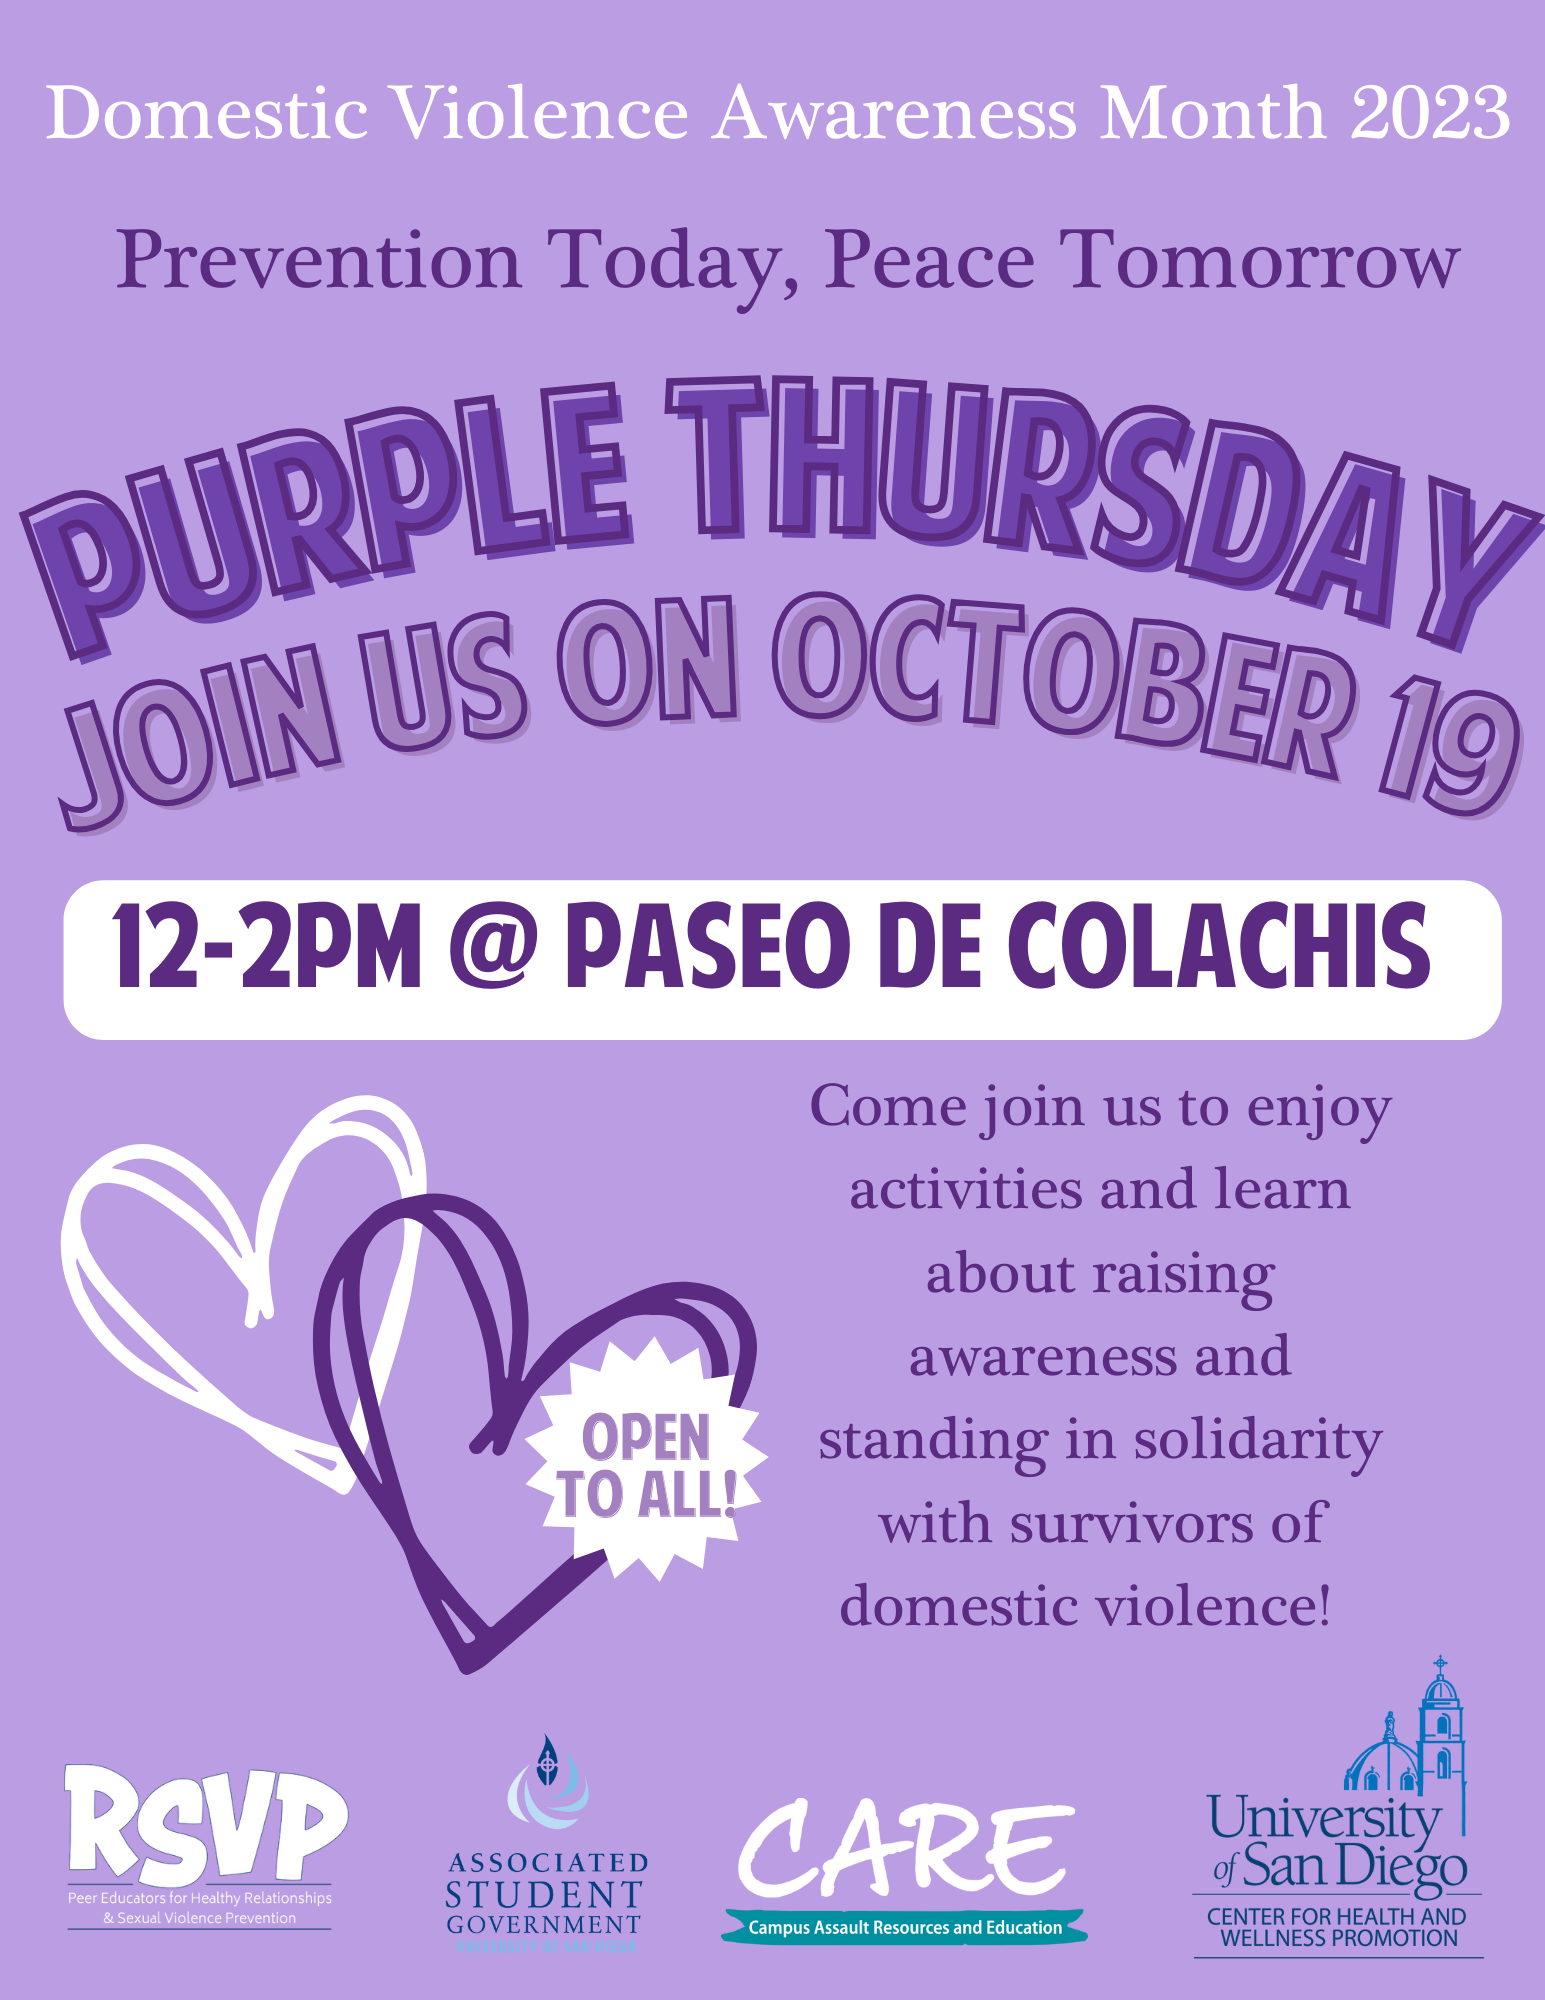 On a purple background, the following text reads: "Domestic Violence Awareness Month 2023" ; "Prevention Today, Peace Tomorrow" ; "Purple Thursday" ; "Join us on October 19" ; "12-2pm @ Paseo De Colachis" ; "Come join us to enjoy activities and learn about raising awareness and standing in solidarity with survivors of domestic violence!" On the lower left side of the page, one white heart and one purple heart overlap with a white star including the text: "Open to all!" inside. On the bottom of the page, the following logos are lined: RSVP, ASG, Care, USD CHWP.